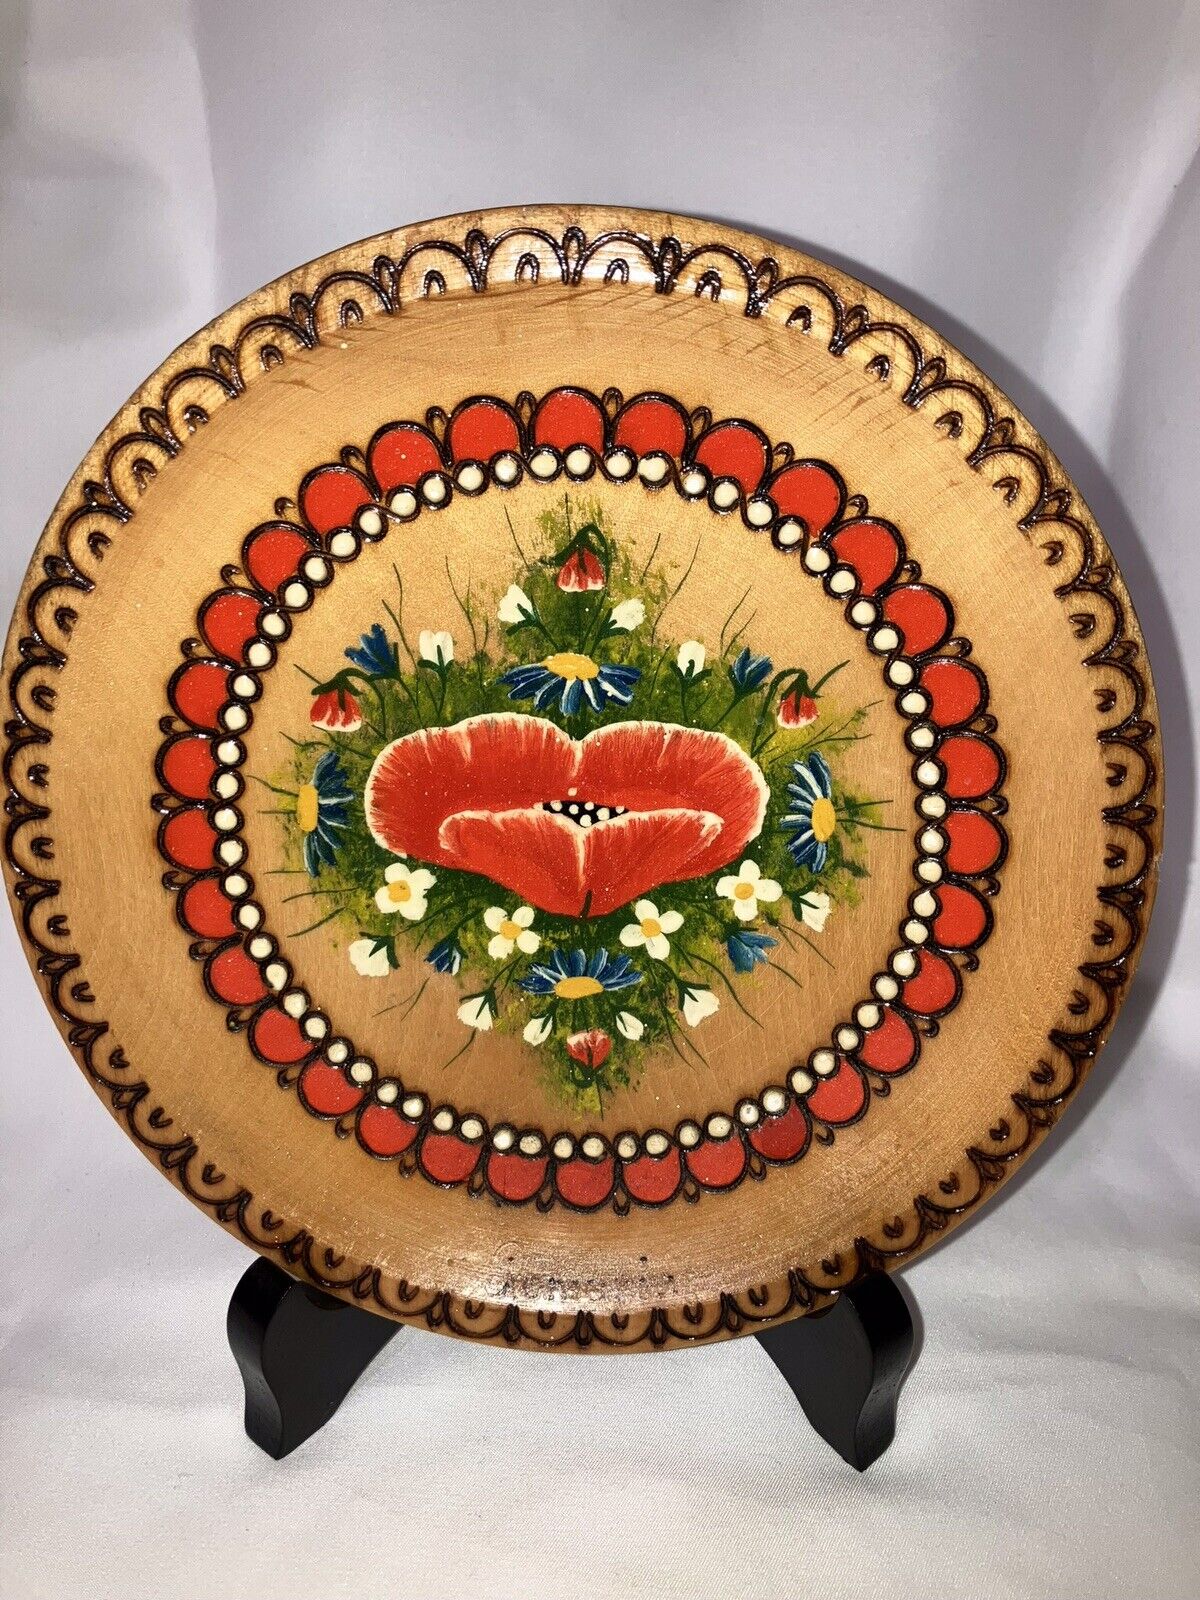 Vintage Romanian Carved Decorative Wooden Dish With Painted Poppy Flowers